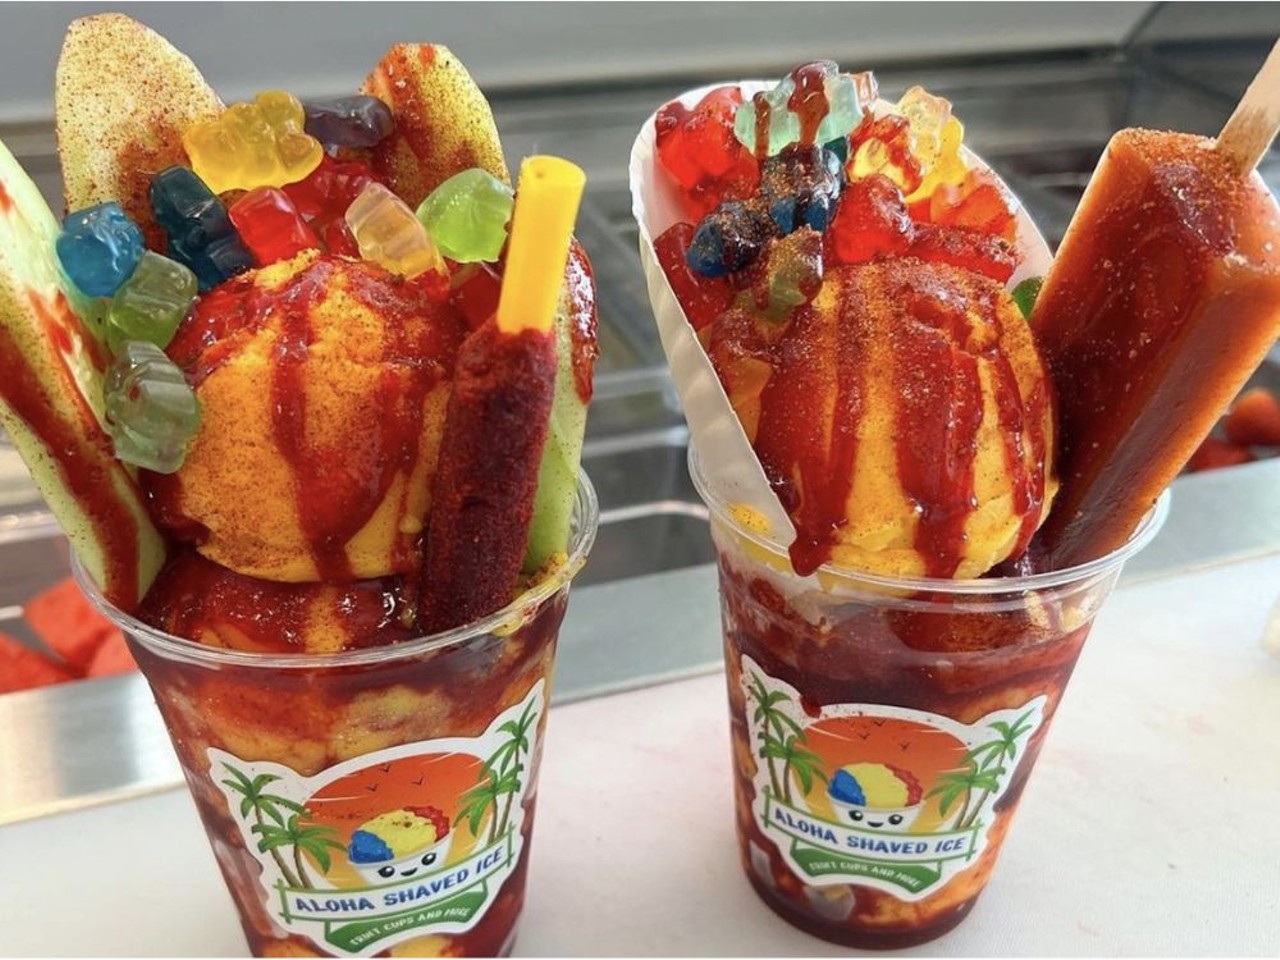 Treat yourself to a raspa or mangonada
What better cure for a hot day than a brain freeze? San Antonio has plenty of delicious cold treats to enjoy, like puro slushies, raspas and mangonadas available at Aloha Shaved Ice and Las Nieves. Not sure where to start? We’ve got you covered.